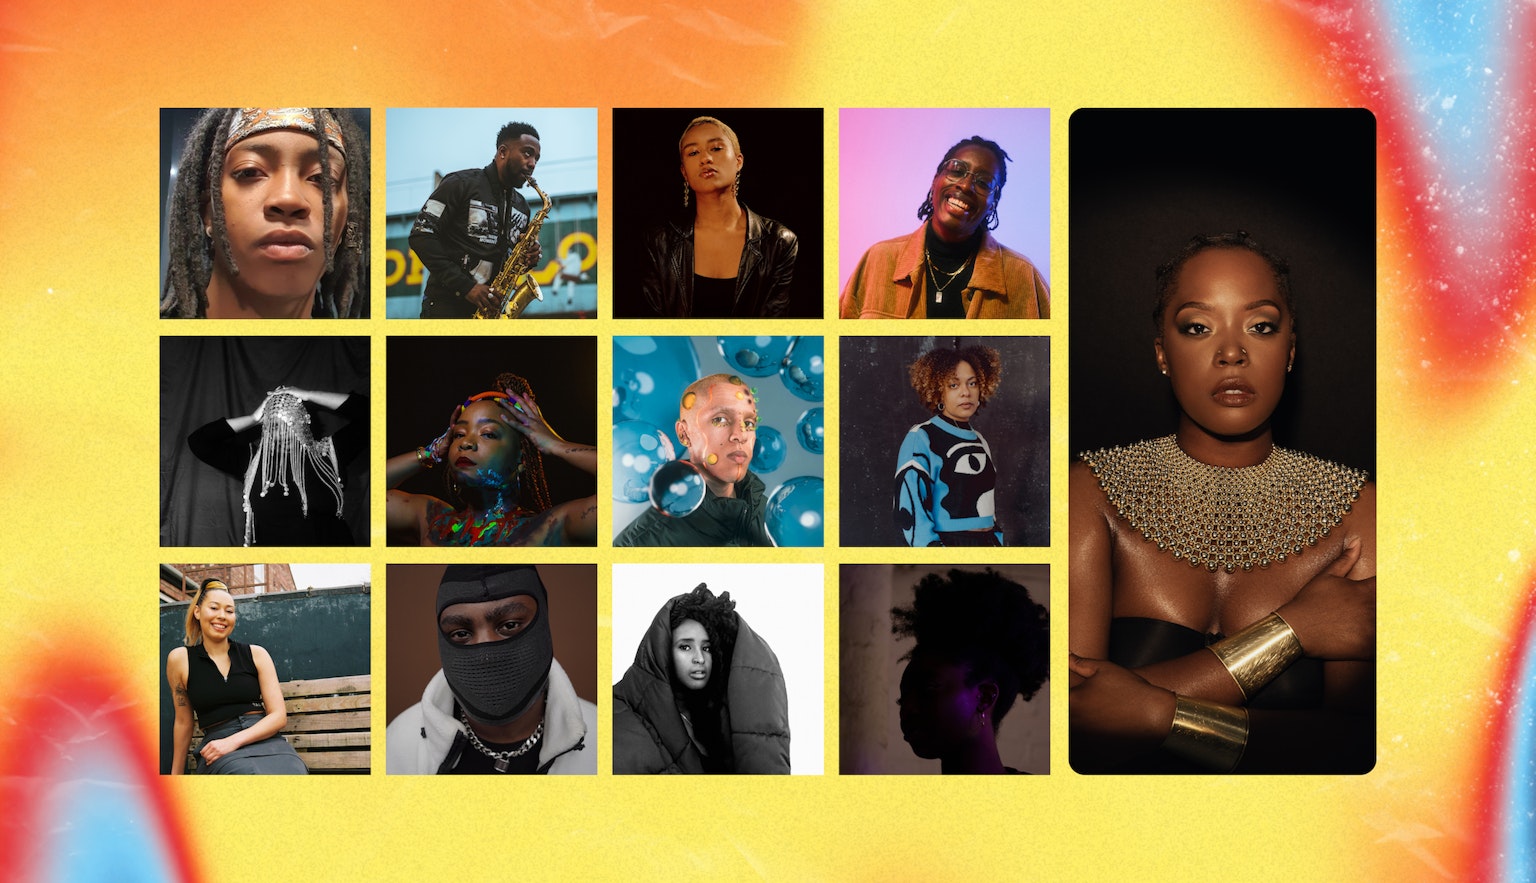 12 square headshots positioned 3 up by 4 across of the artists taking part in Afro Energy. To the right in a rectangle the height of 3 squares up is Karen Nyame KG's headshot. All photos sit on a heatwave background fluctuating between yellow, orange, red and blue.